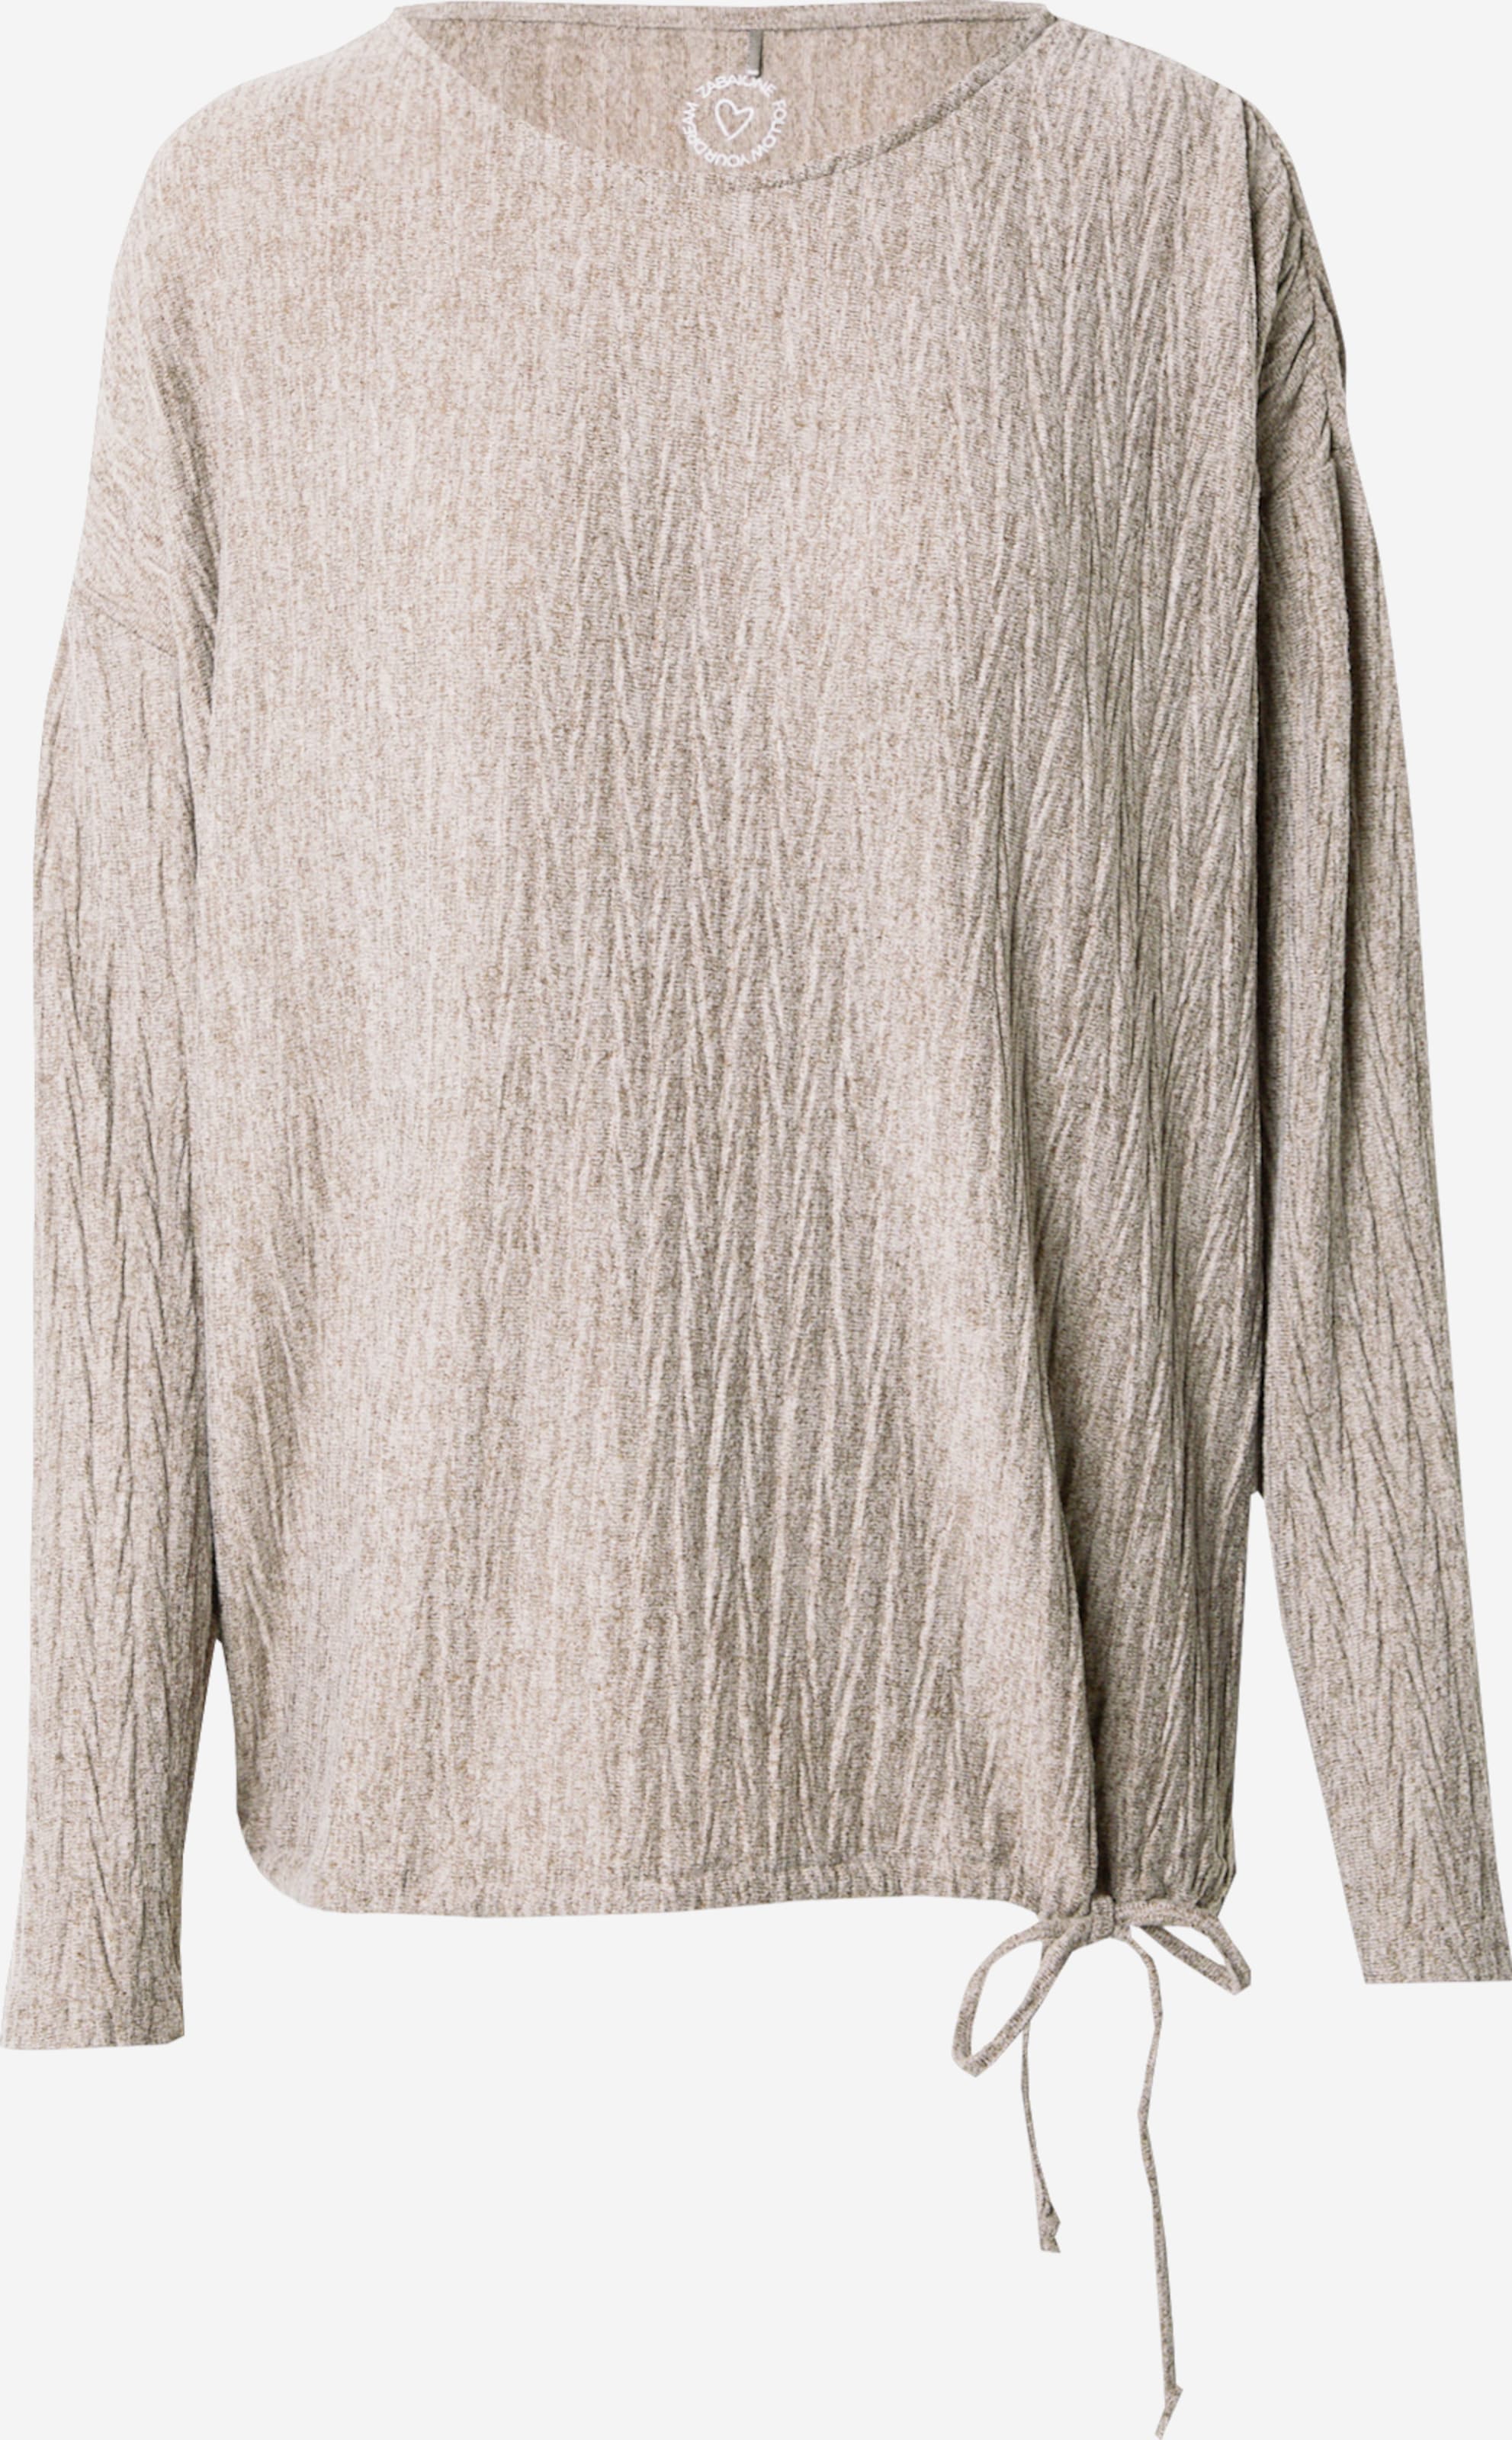 ZABAIONE Shirt \'Sa44nj\' in Taupe | ABOUT YOU